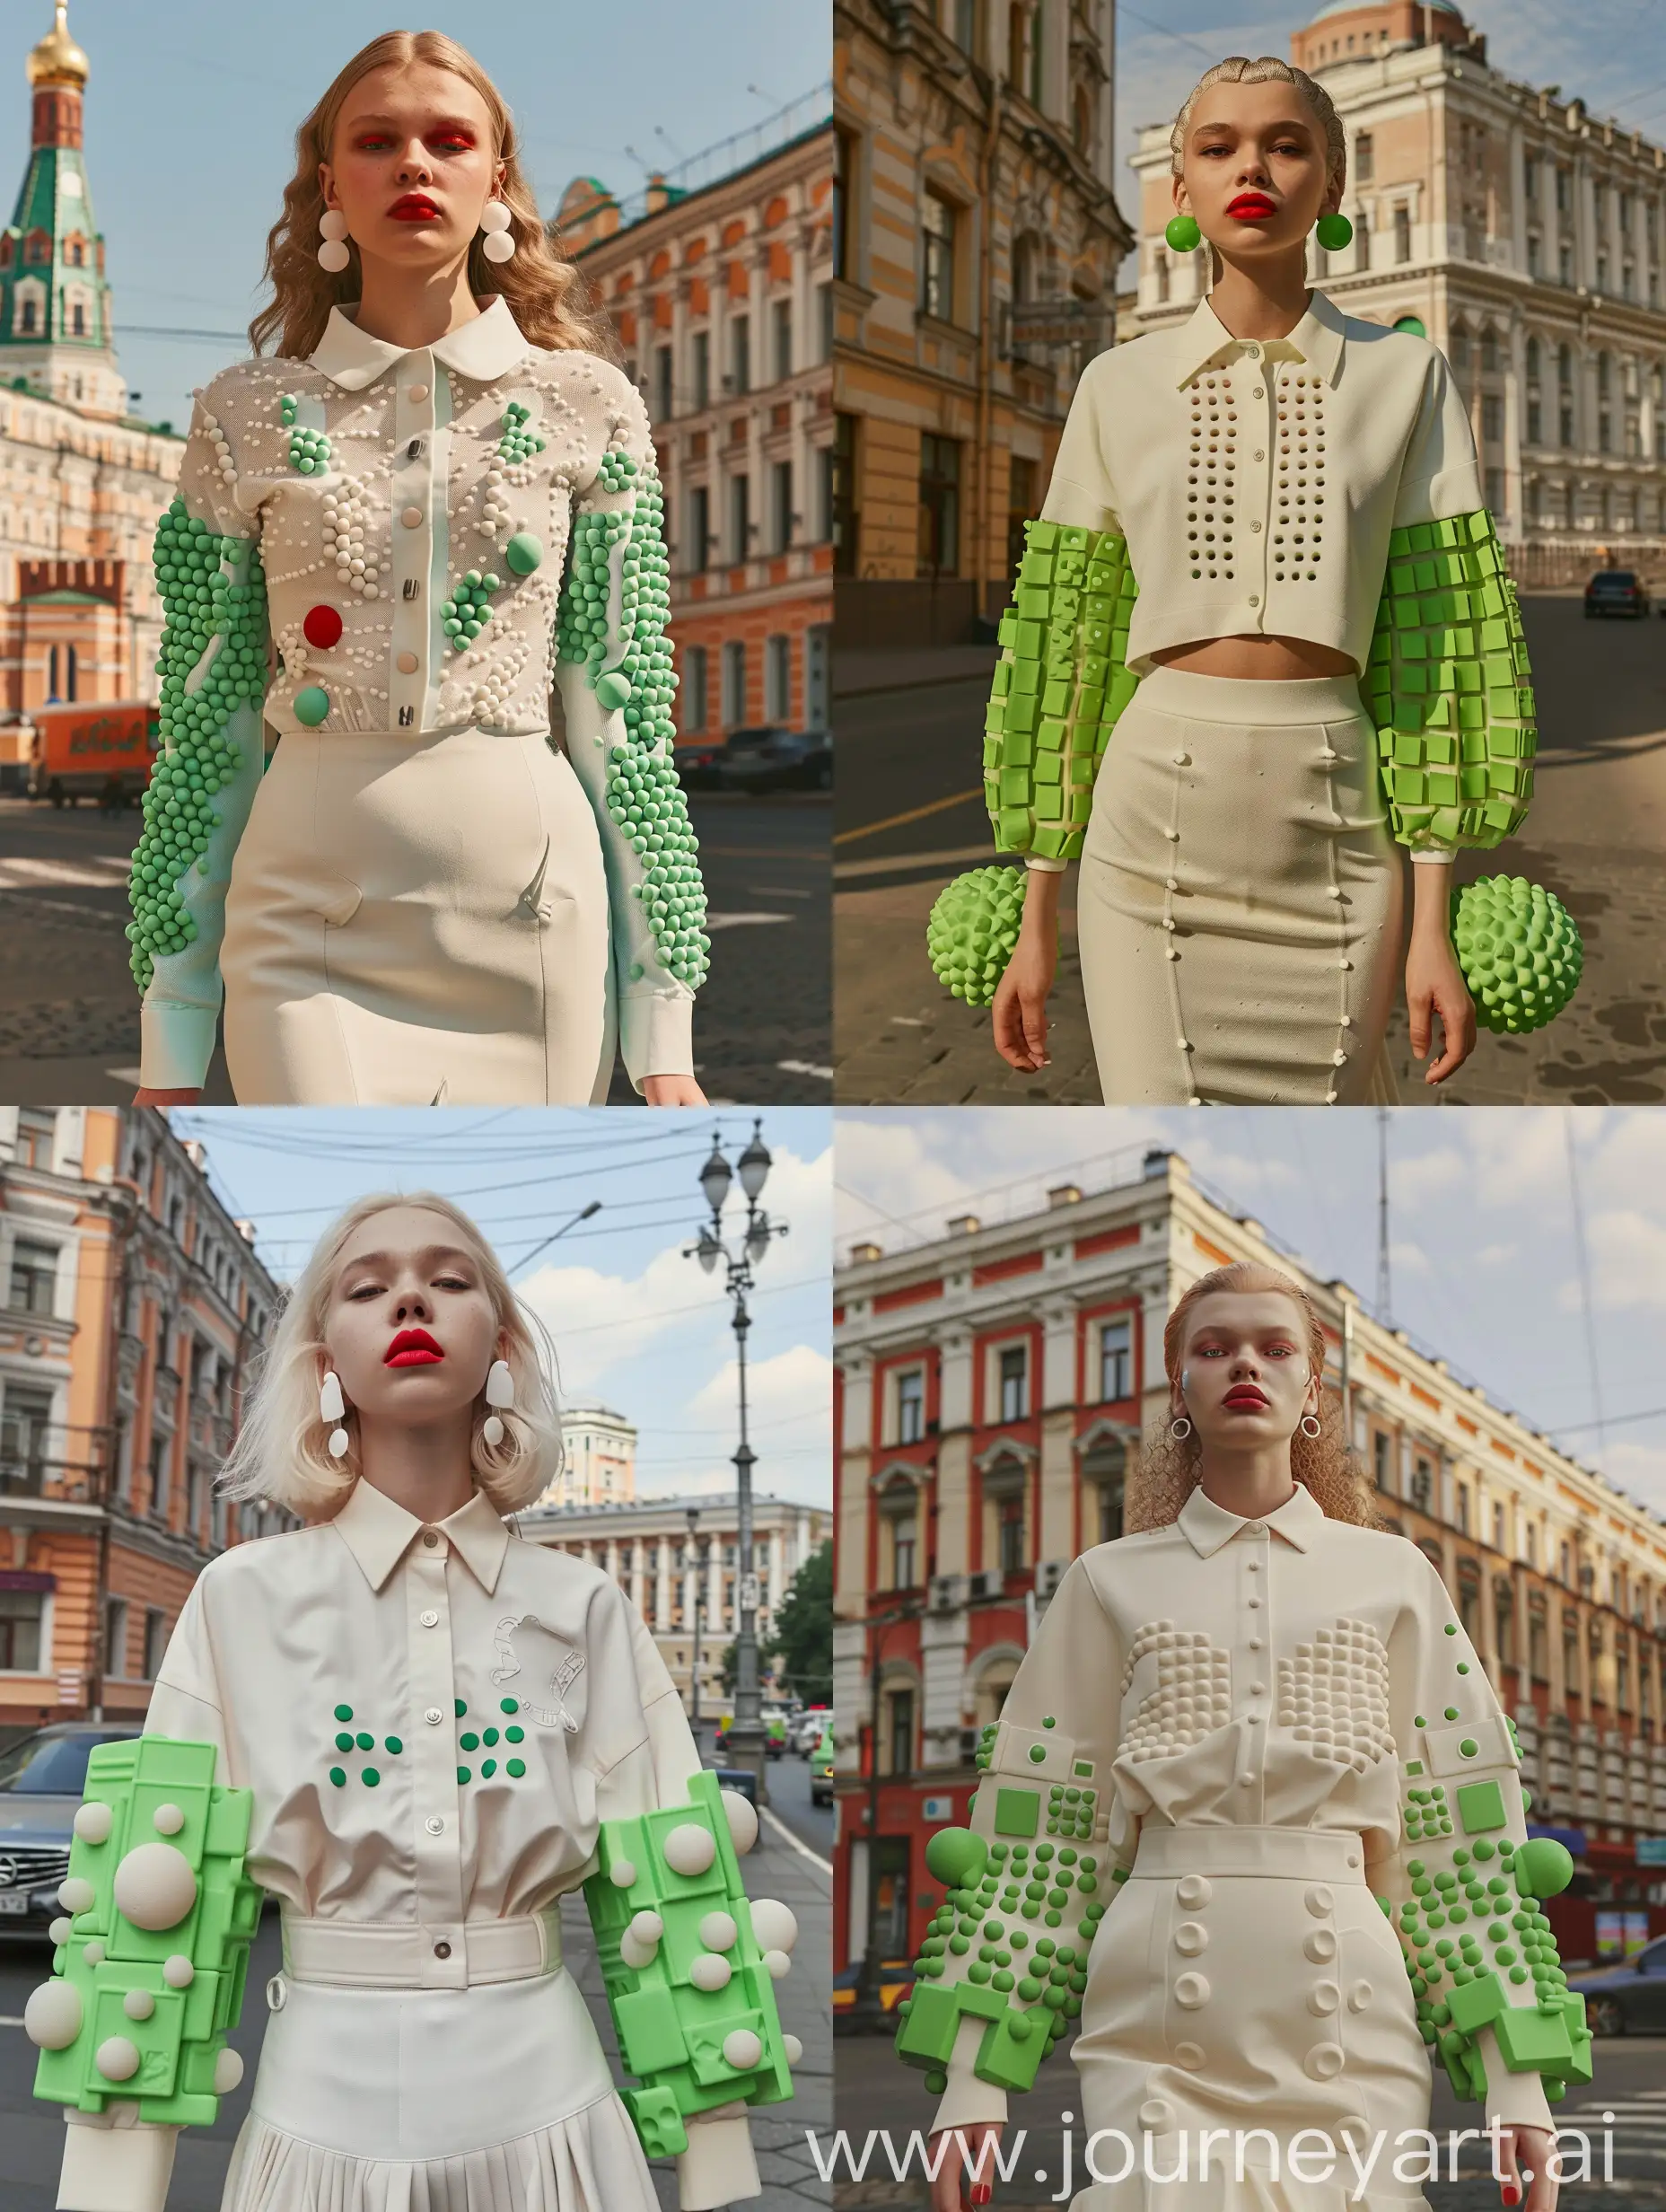 Woman-with-Bordeaux-Hair-and-Matte-Red-Lips-Strolling-Moscow-Streets-in-Dotted-White-Shirt-and-SquarePatterned-Skirt